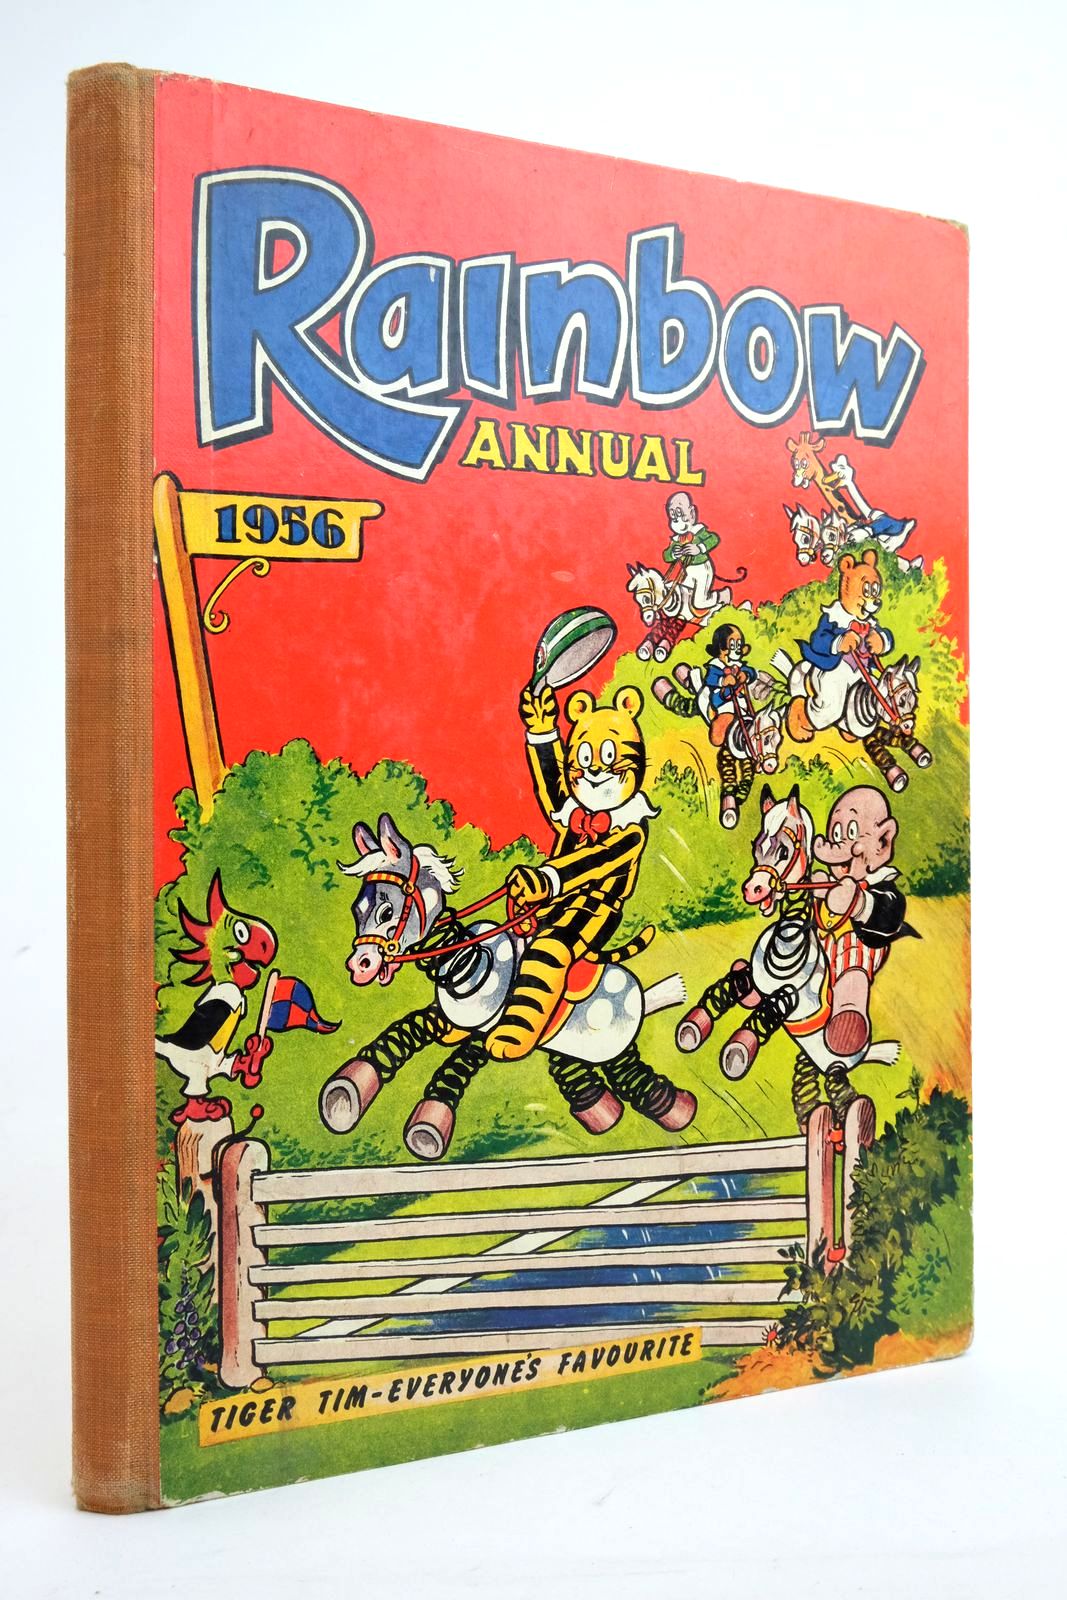 Photo of RAINBOW ANNUAL 1956 published by The Fleetway House (STOCK CODE: 2136176)  for sale by Stella & Rose's Books